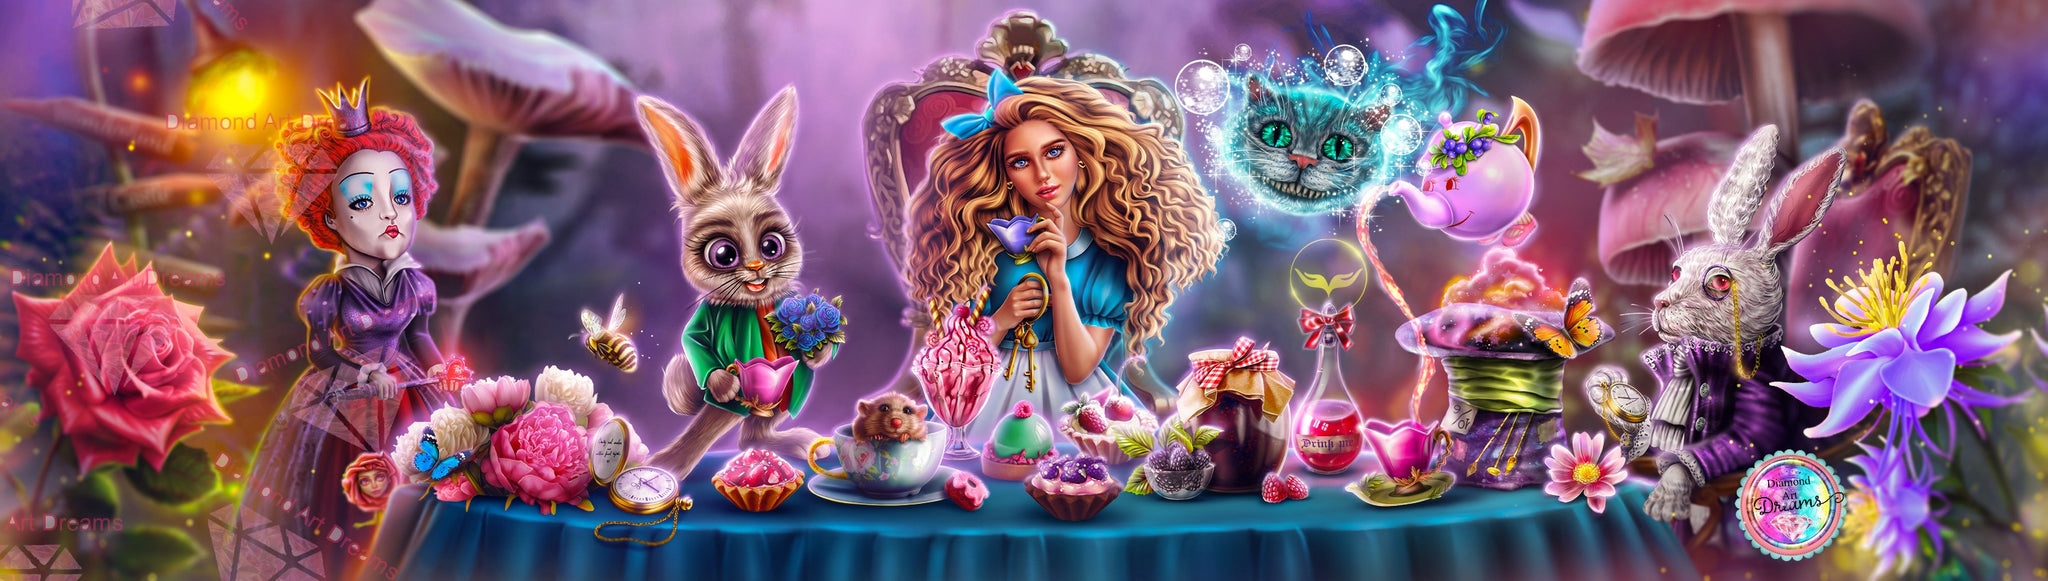 Alice in Wonderland 5D DIY Full Drill Diamond Painting Kits Dp For Kids &  Adults 